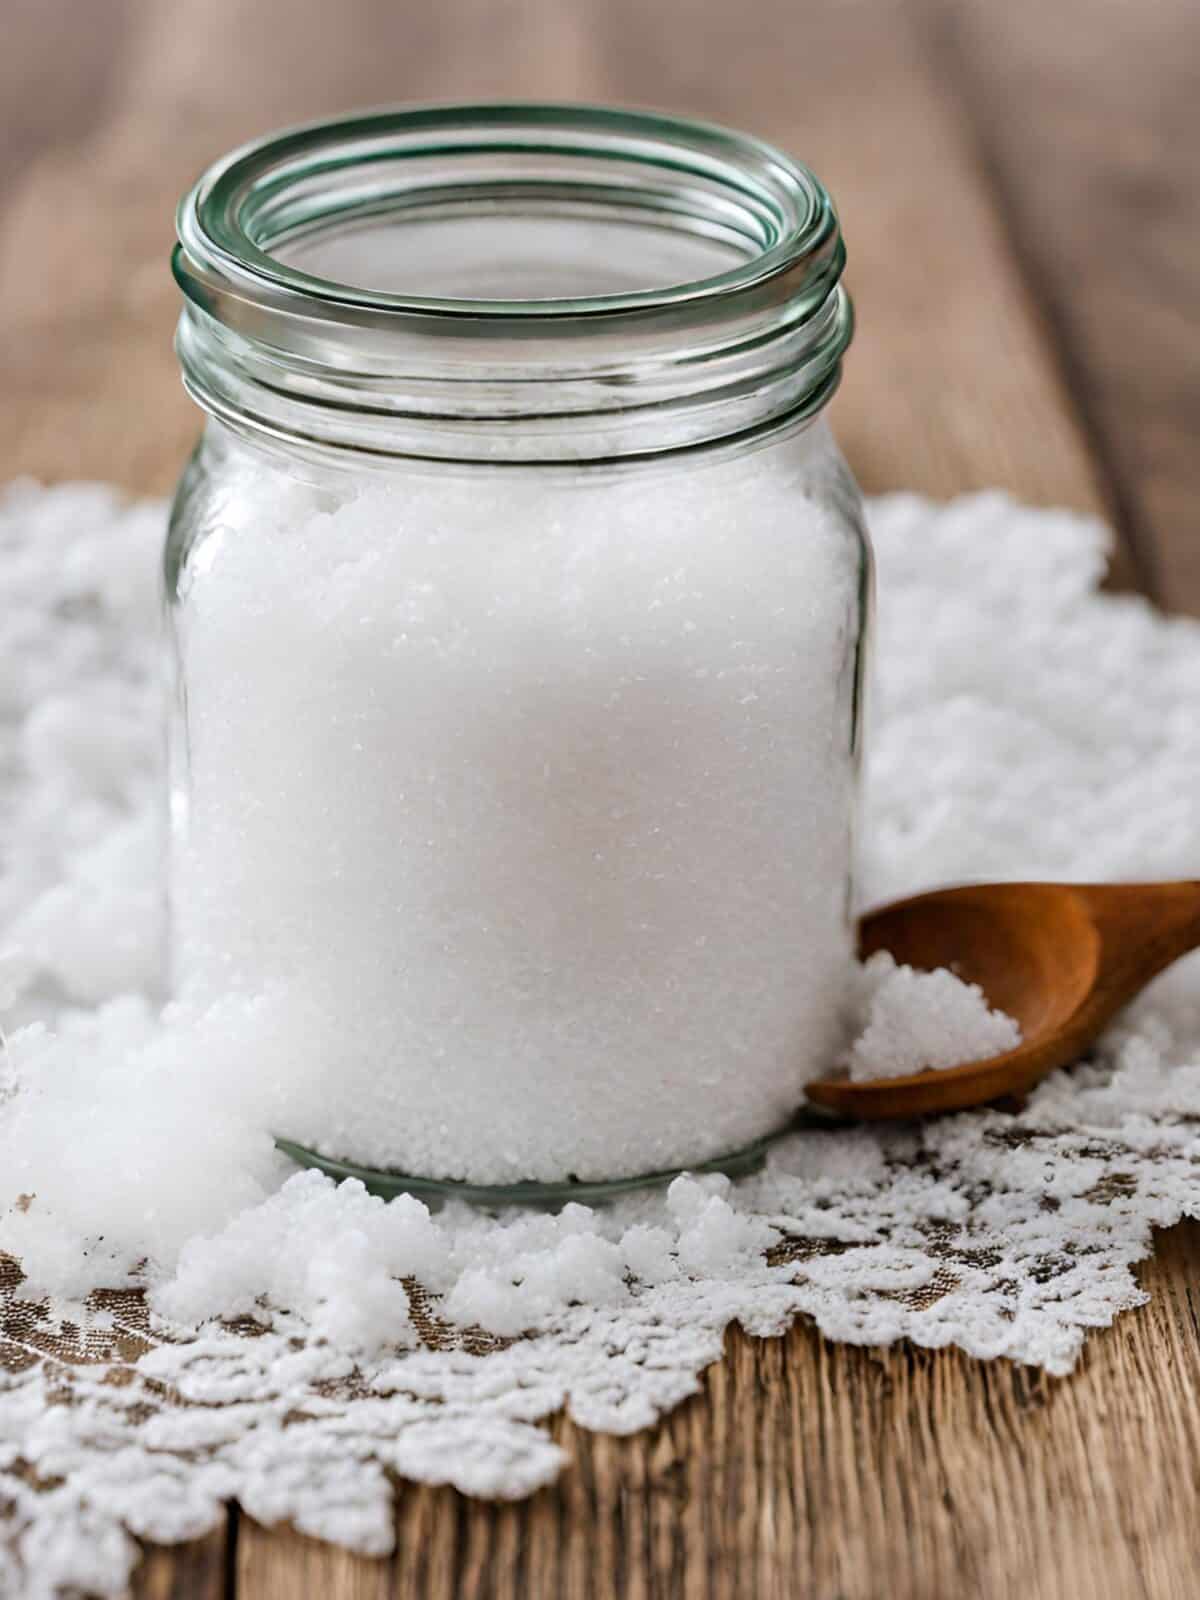 Epsom salt in a jar with a wooden spoon